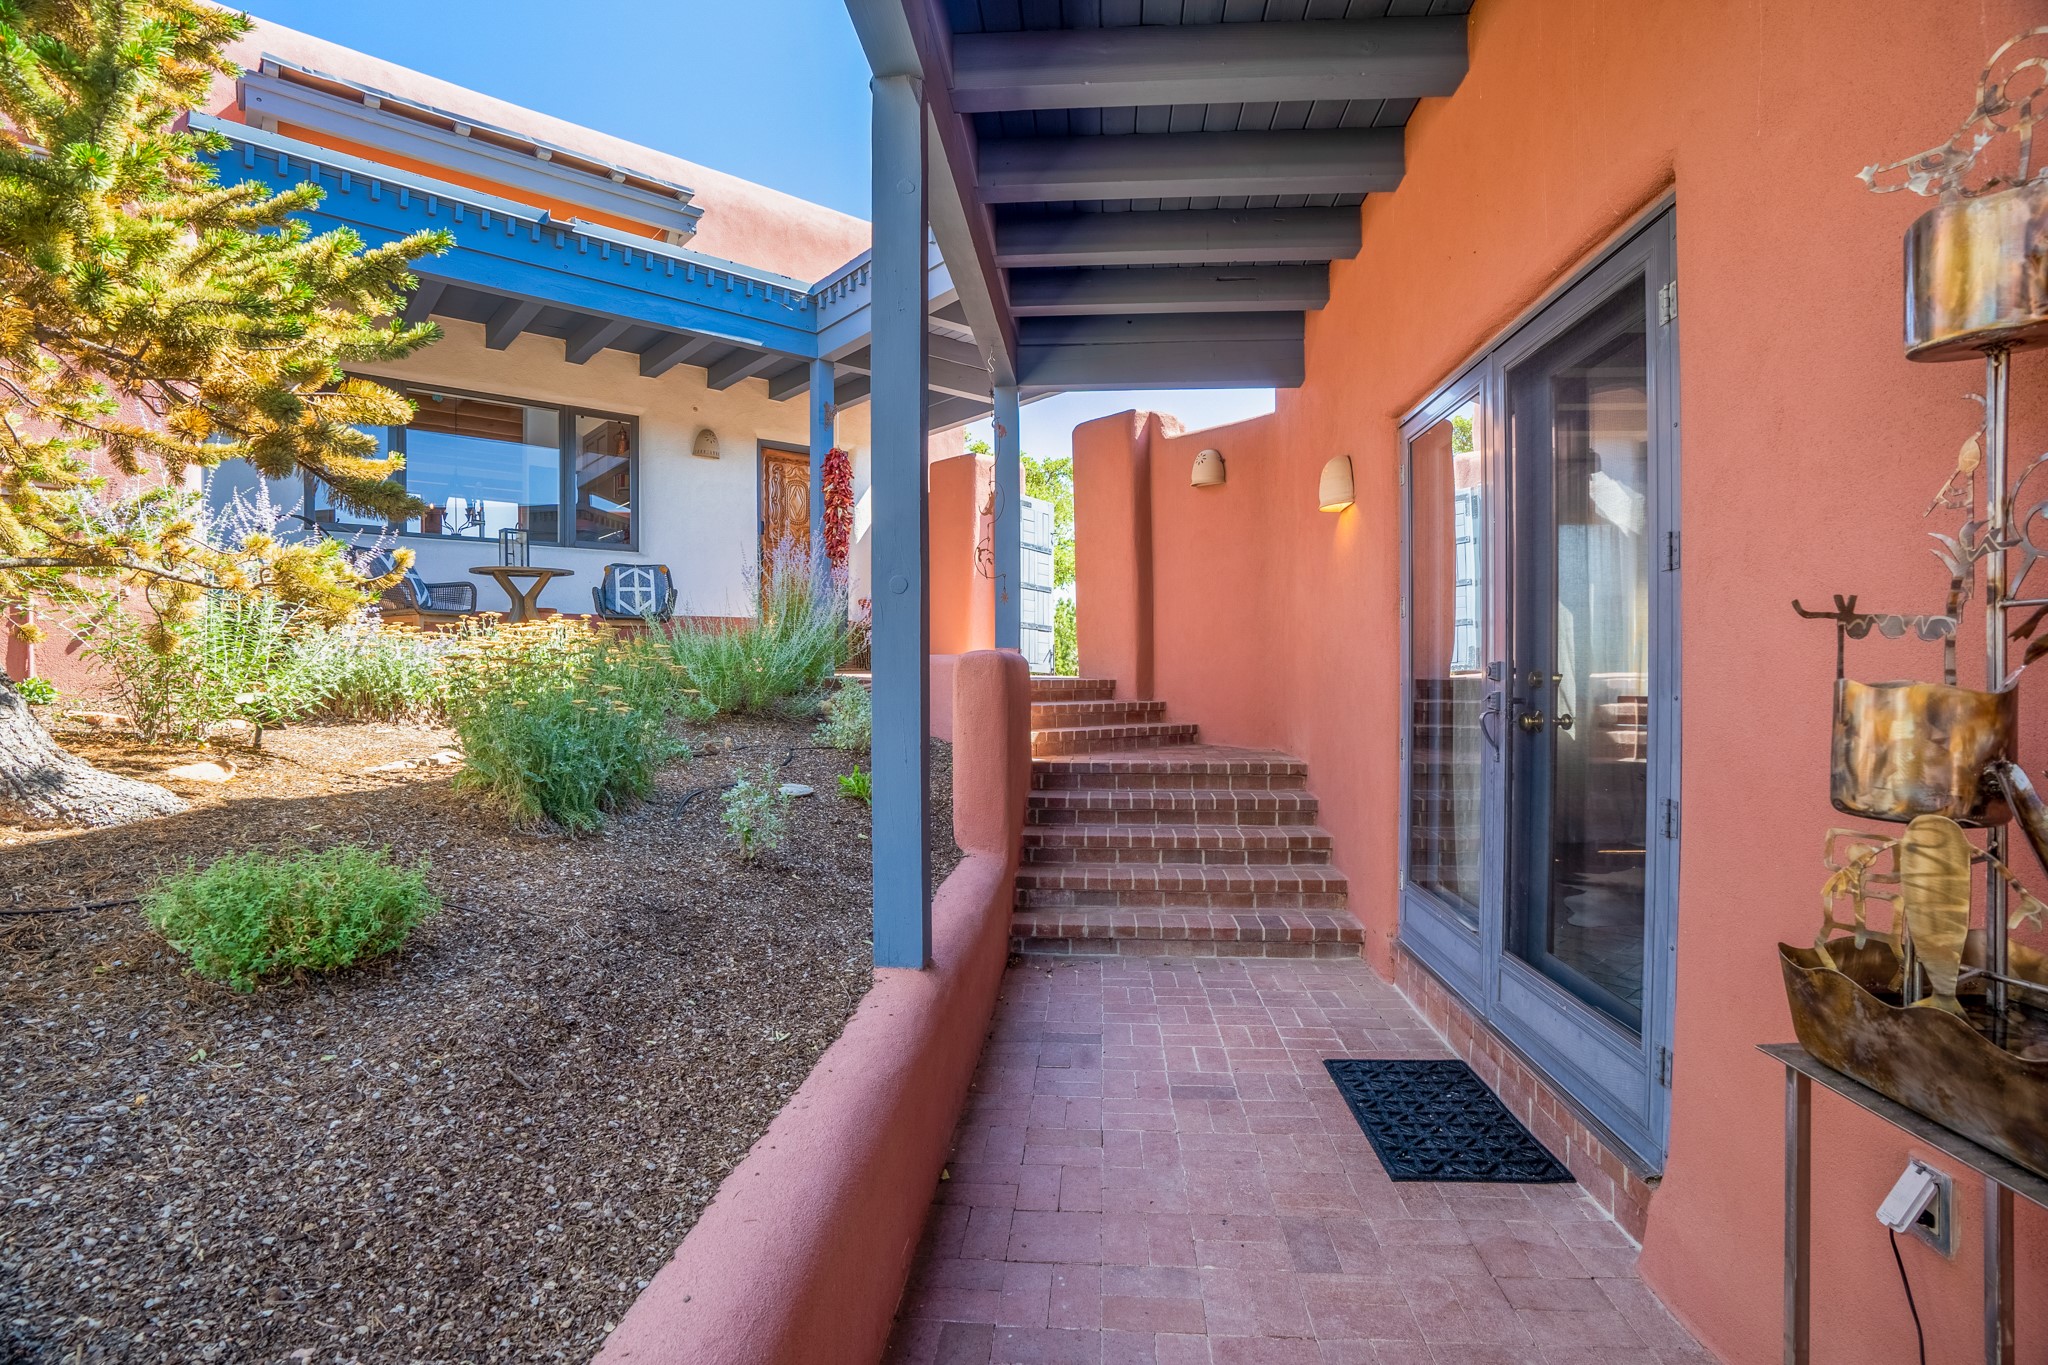 Breezeway leading from garage to casita and main house